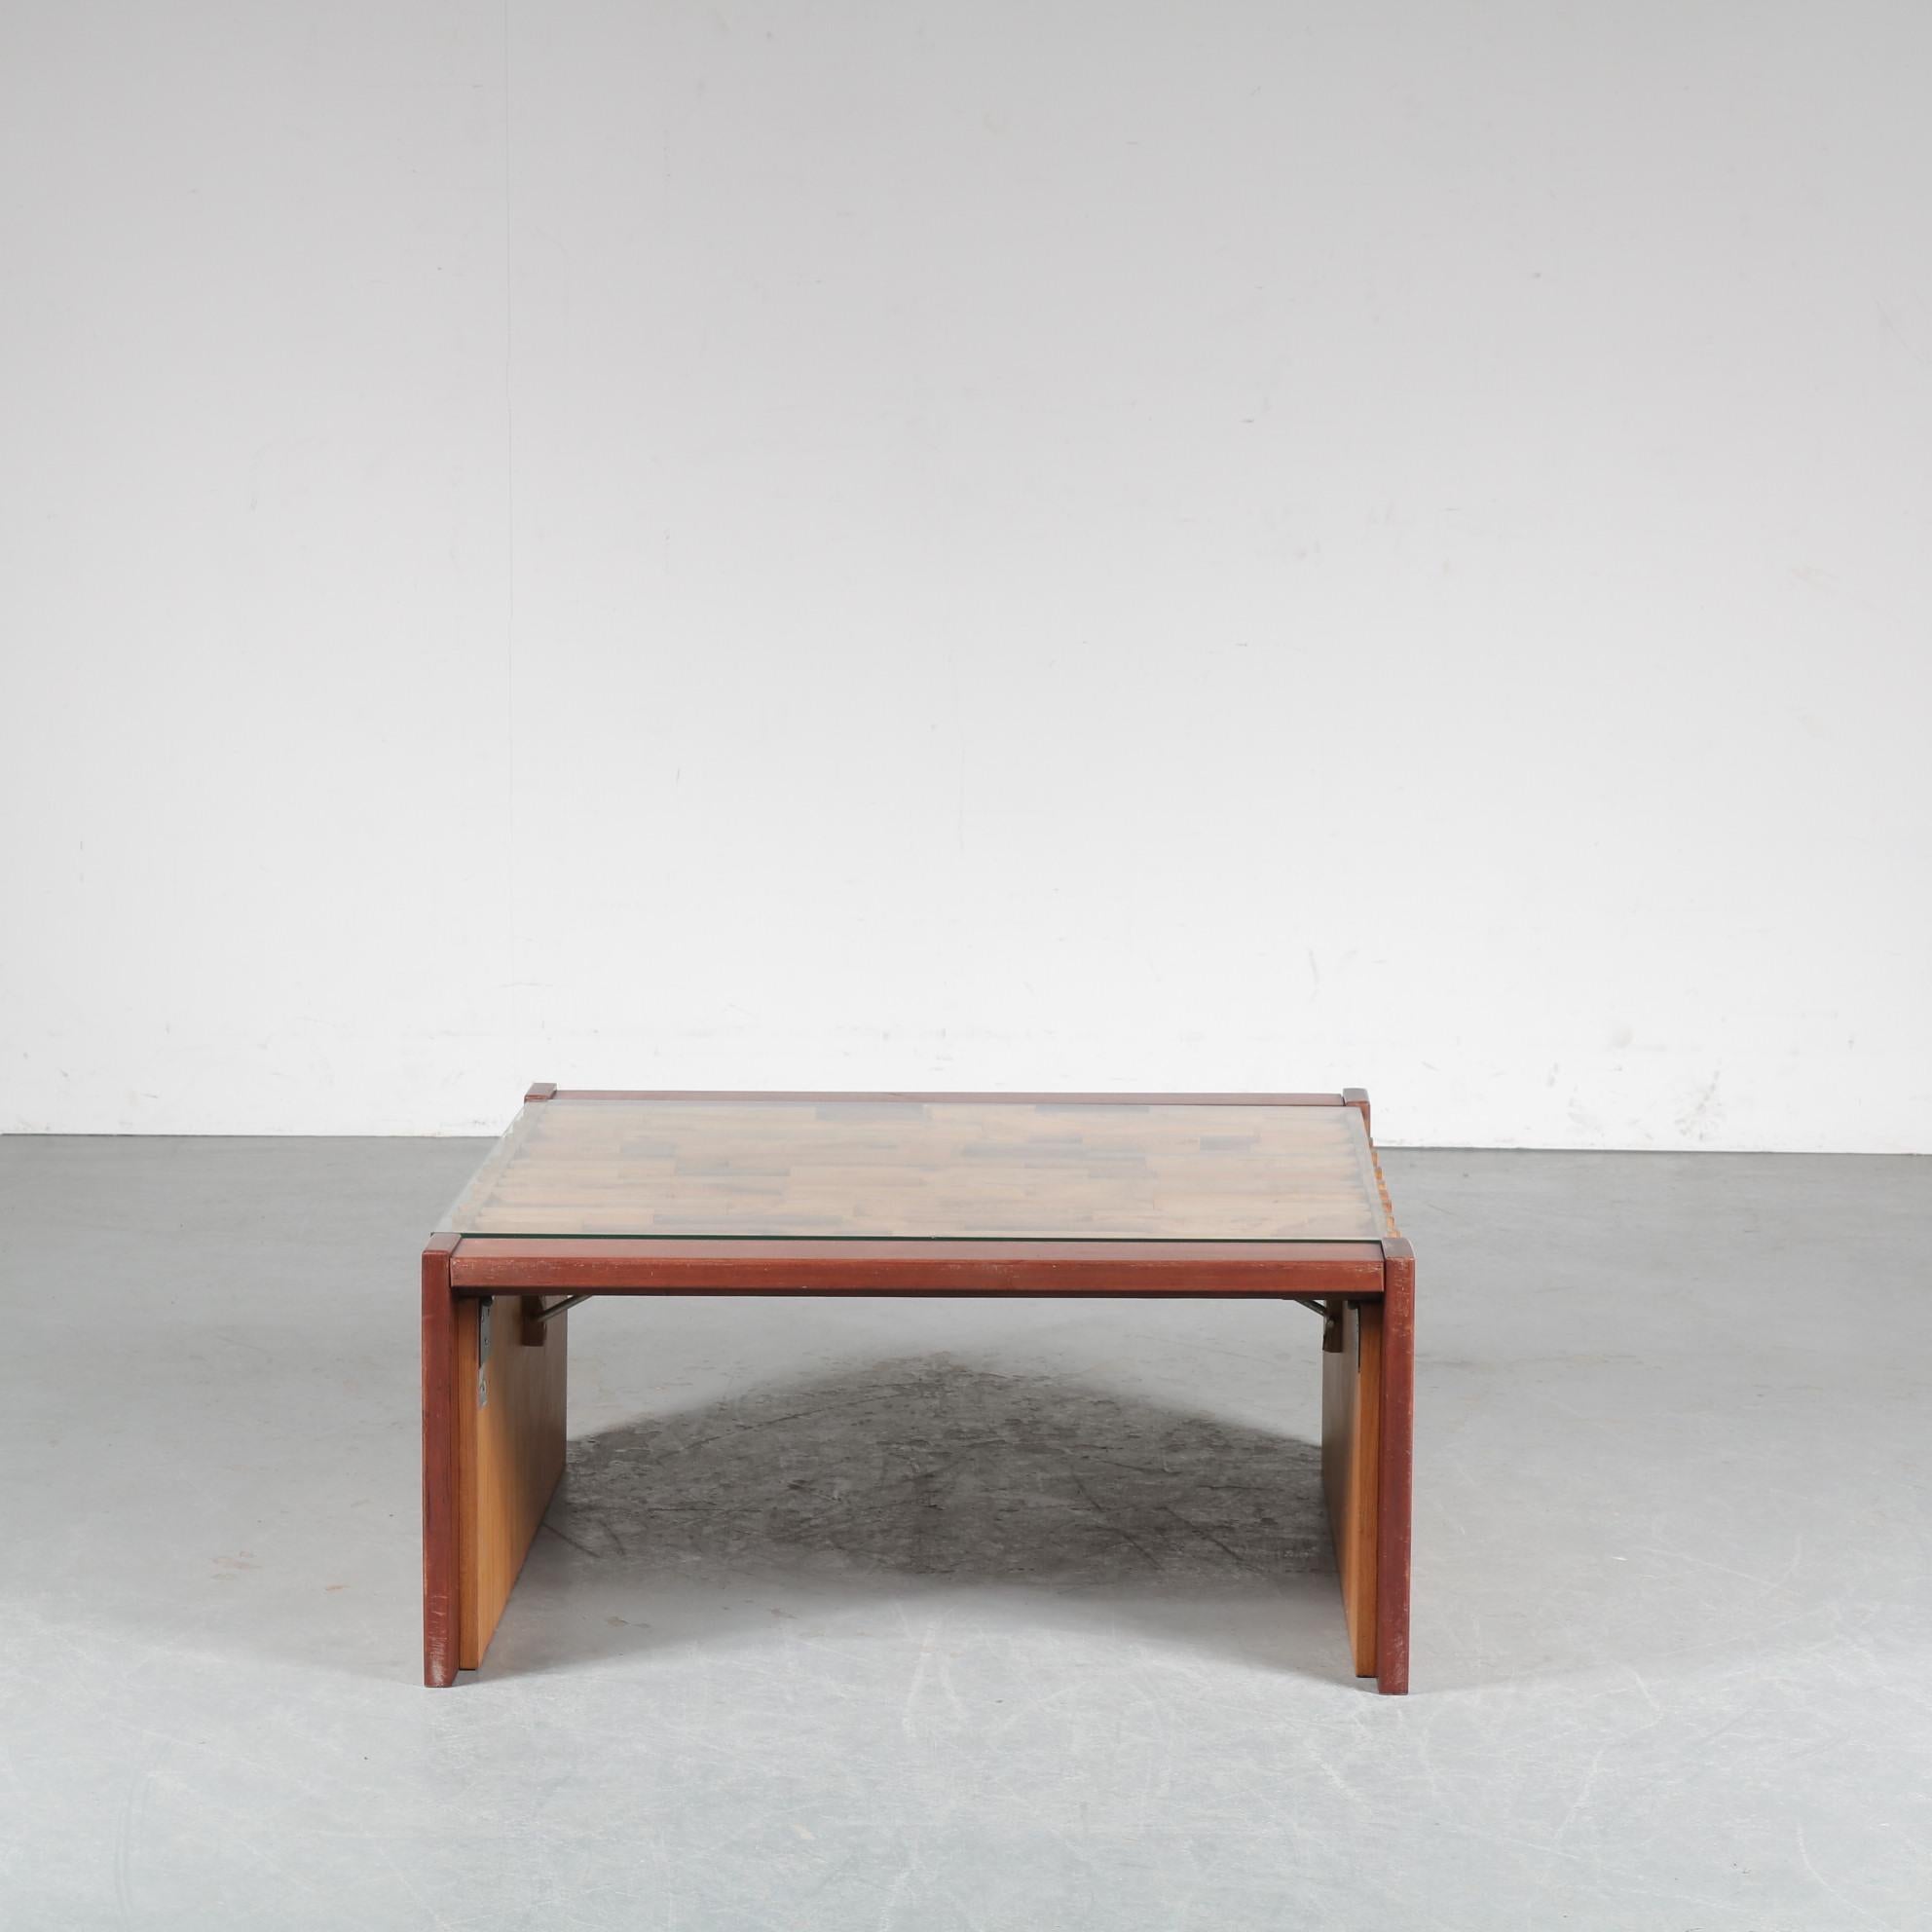 A beautiful coffee table designed by Percival Lafer in Brazil, circa 1960.

This amazing piece is made of high quality tropical hardwood that is very well crafted in different layers, giving the table a nice style. It’s clear glass top gives it an